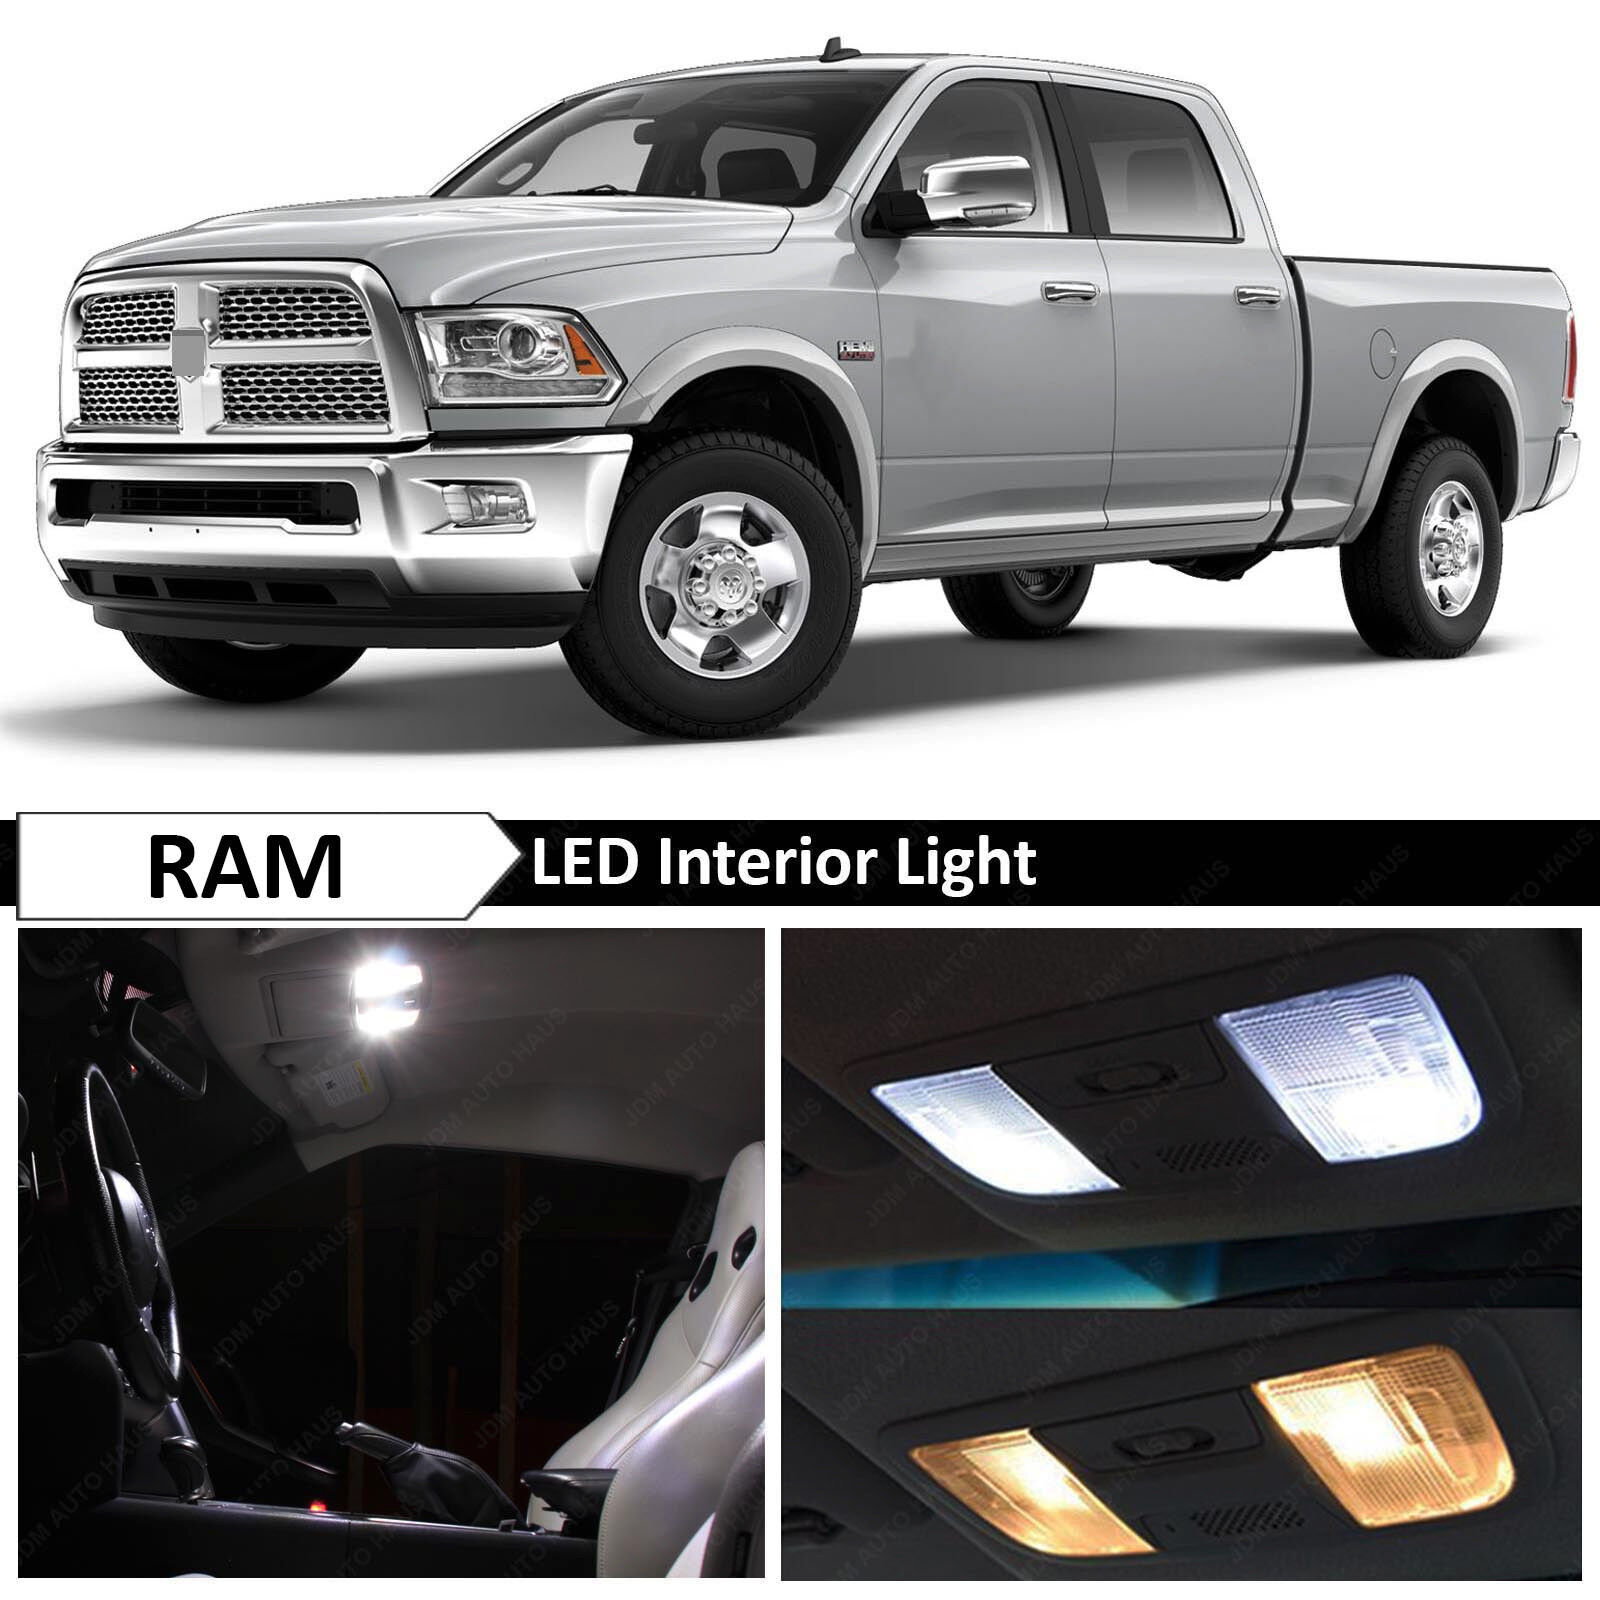 12x White Interior Map Dome LED Lights Package Kit for 2009-2014 Dodge RAM 1500